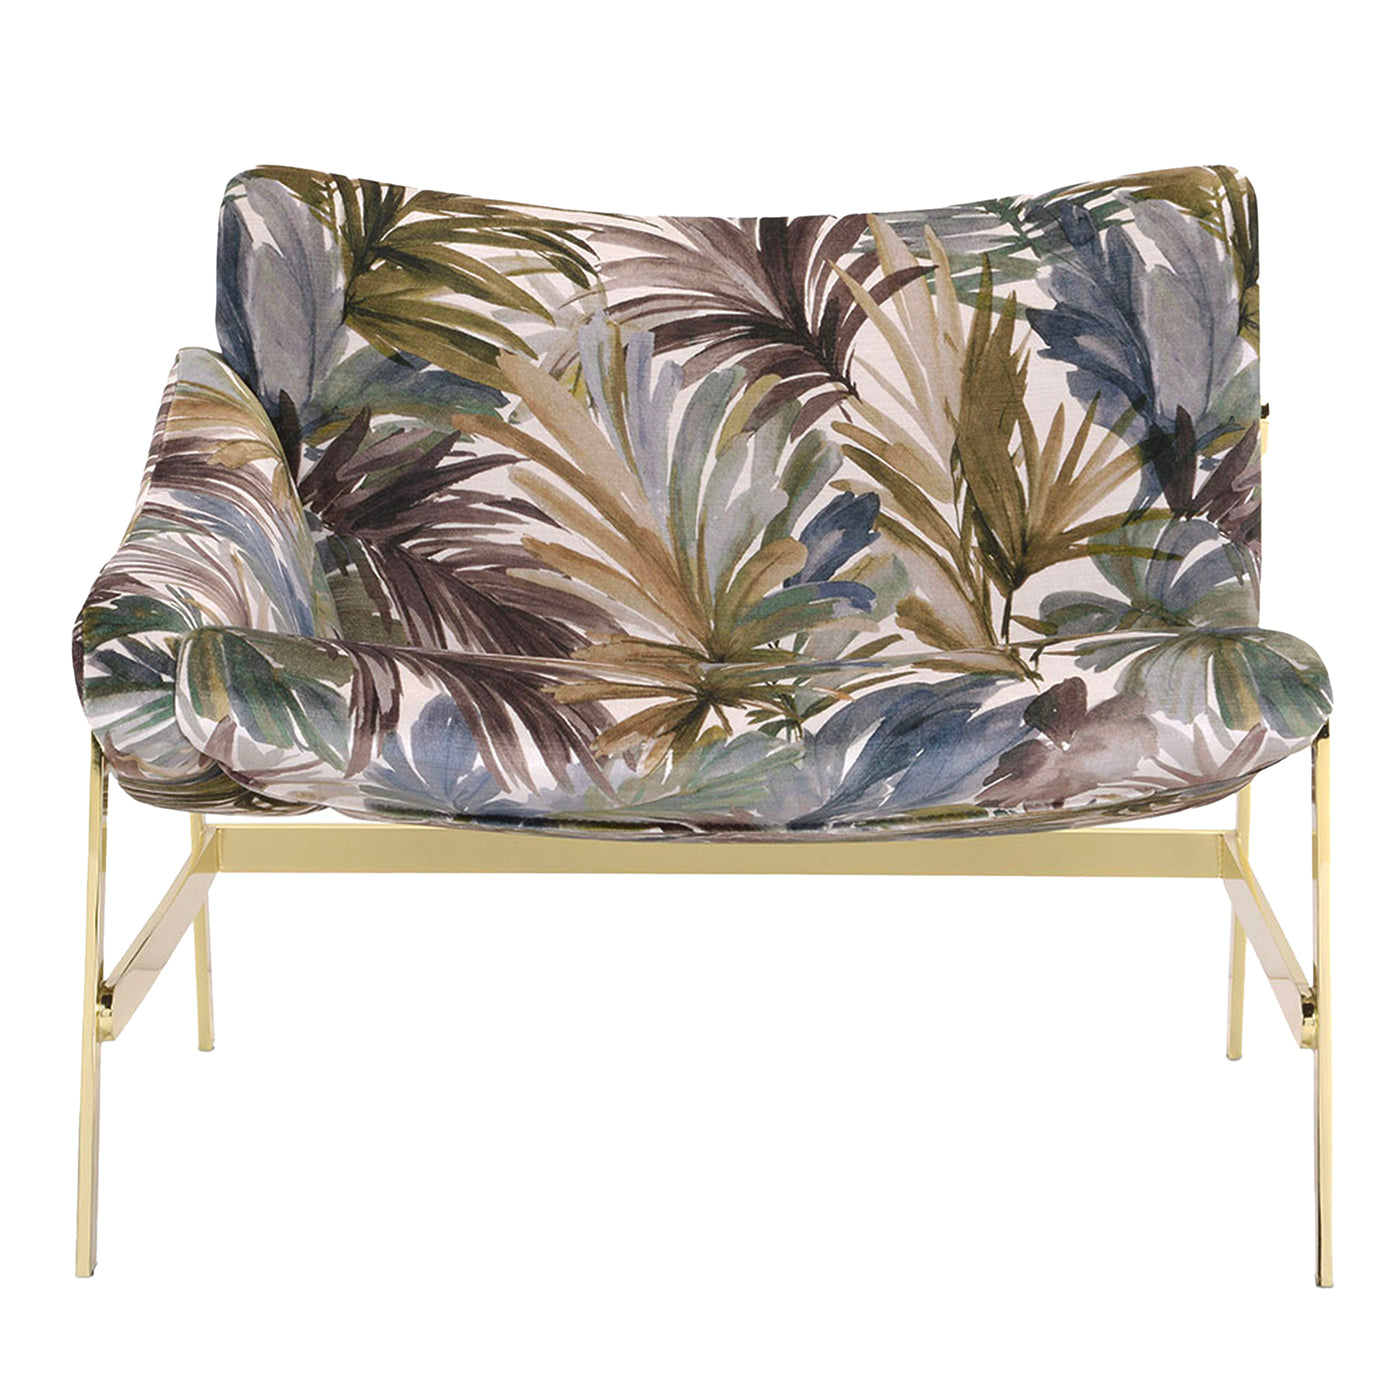 Hammock Right Tropical-Patterned Armchair by Debonademeo - Main view